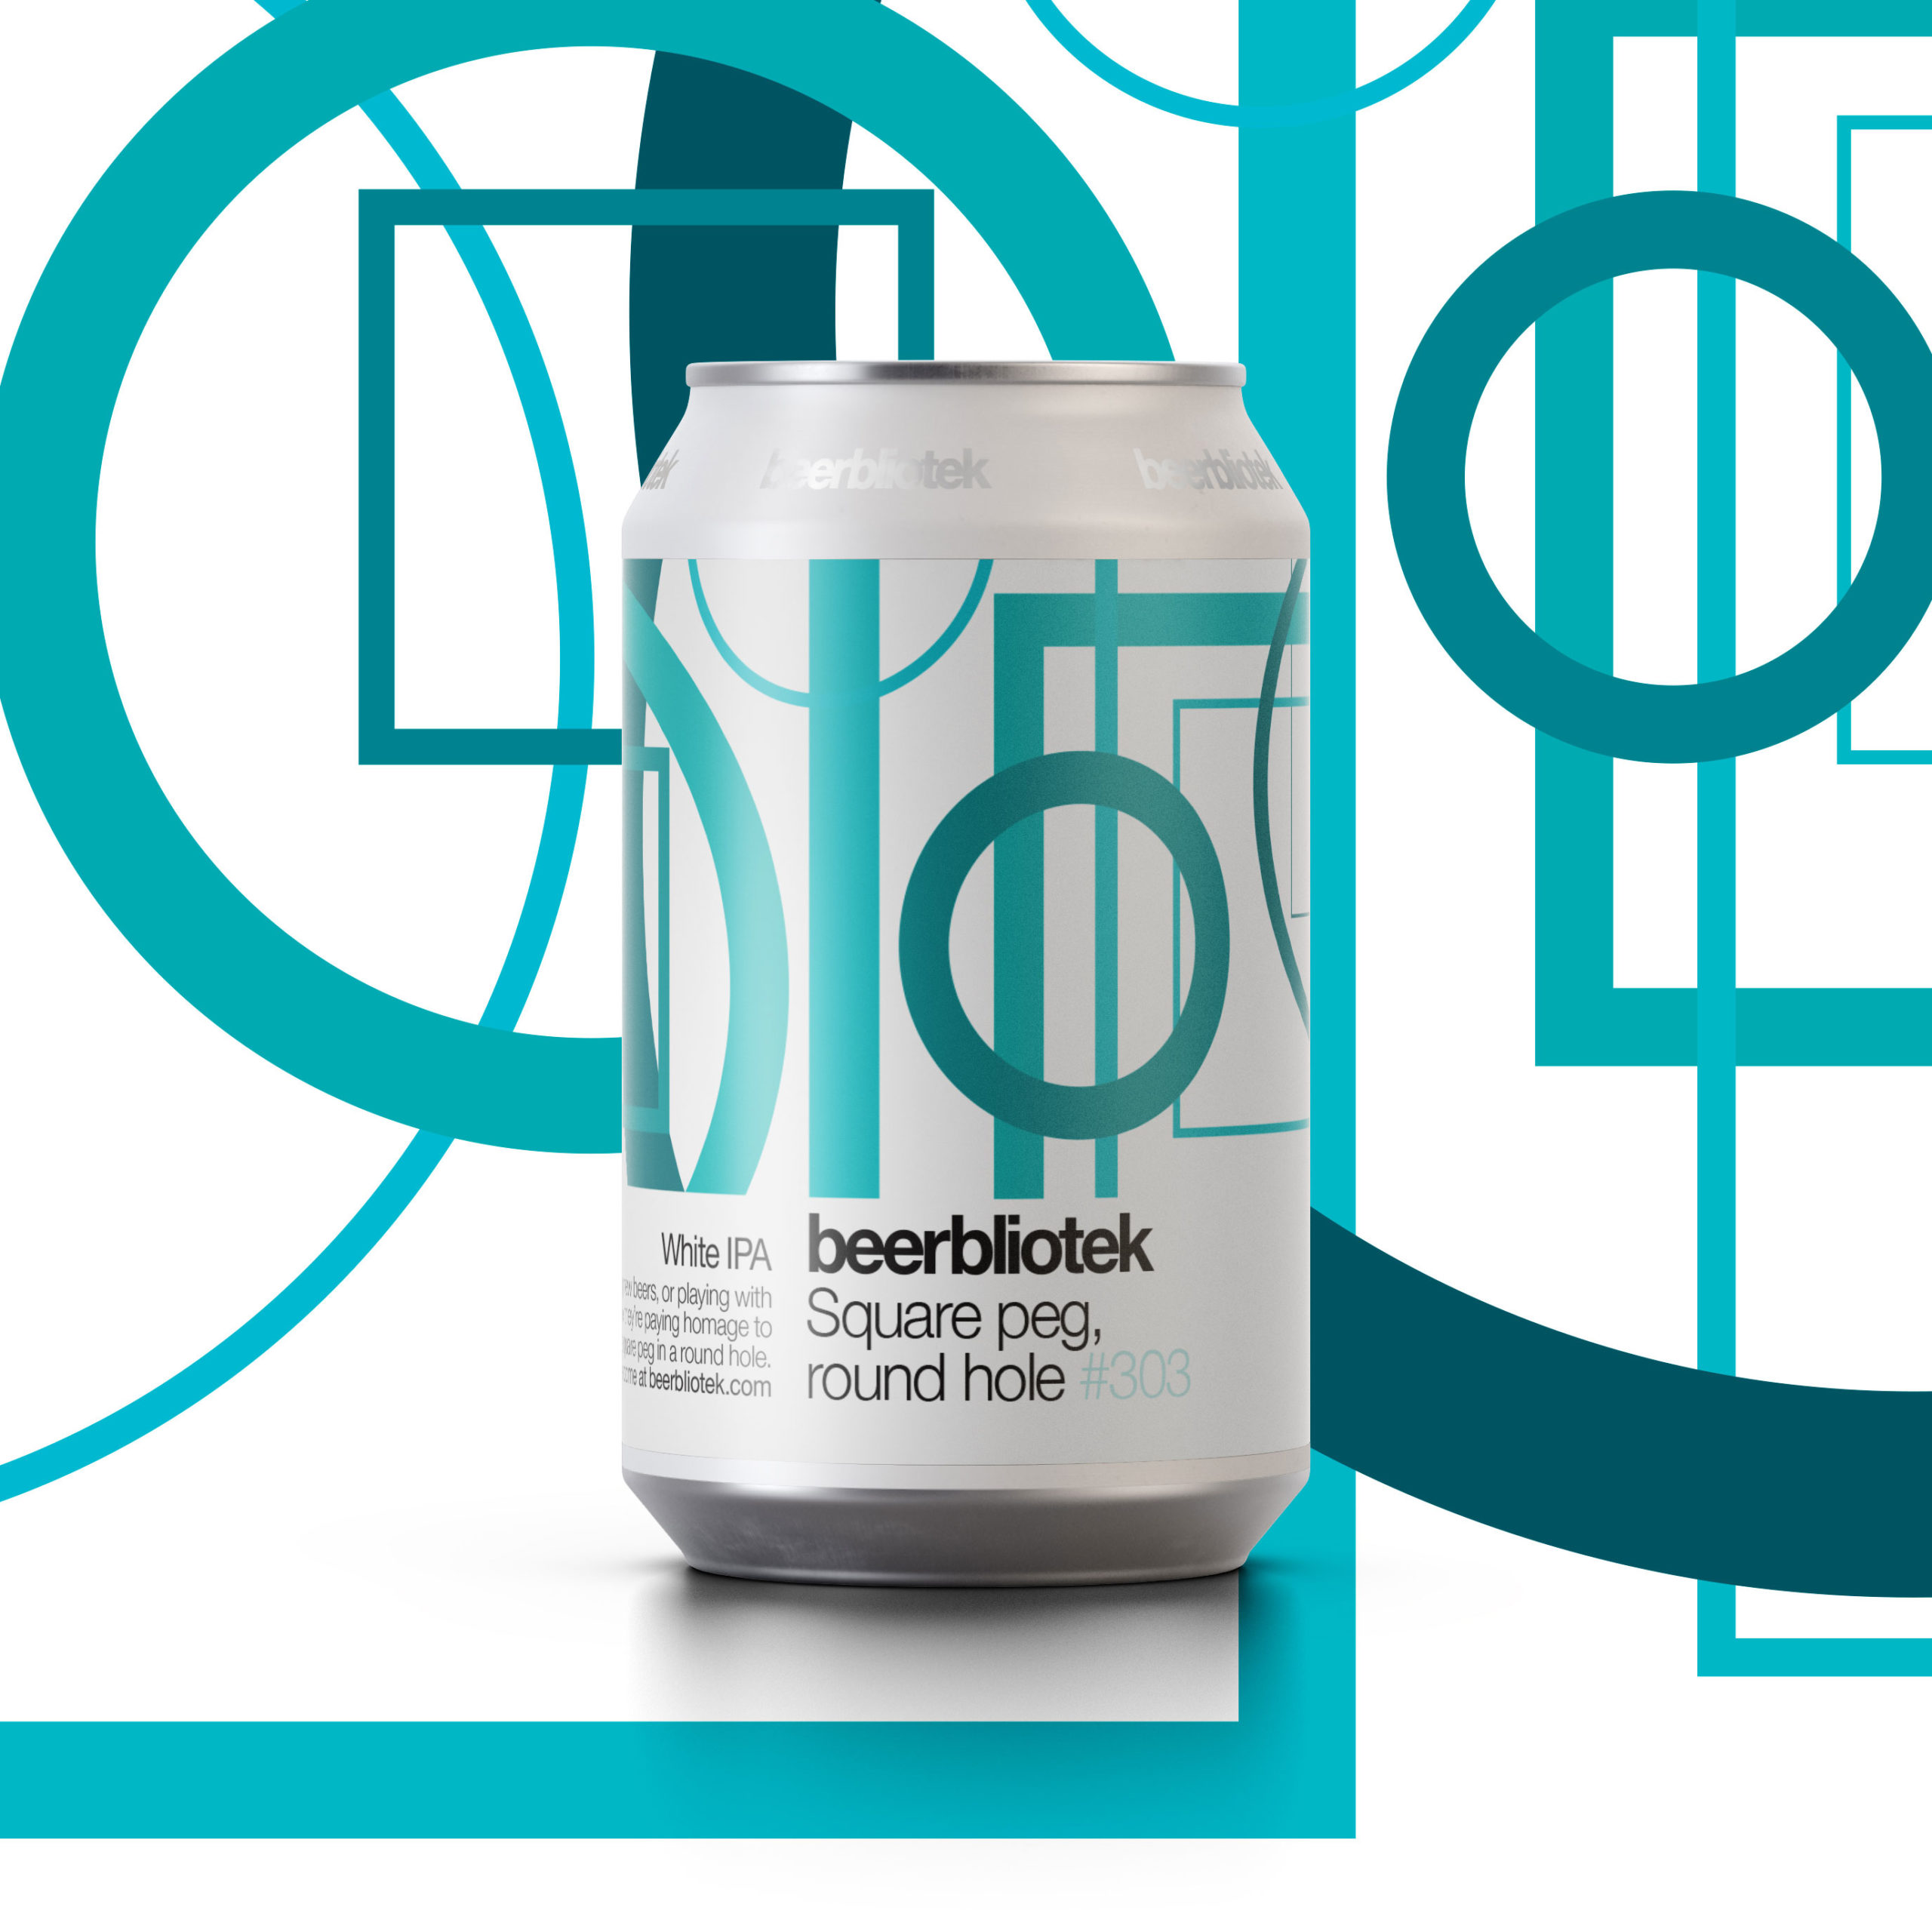 A marketing can packshot of Square peg, round hole, a White IPA, brewed in Gothenburg, by Swedish Craft Brewery Beerbliotek.